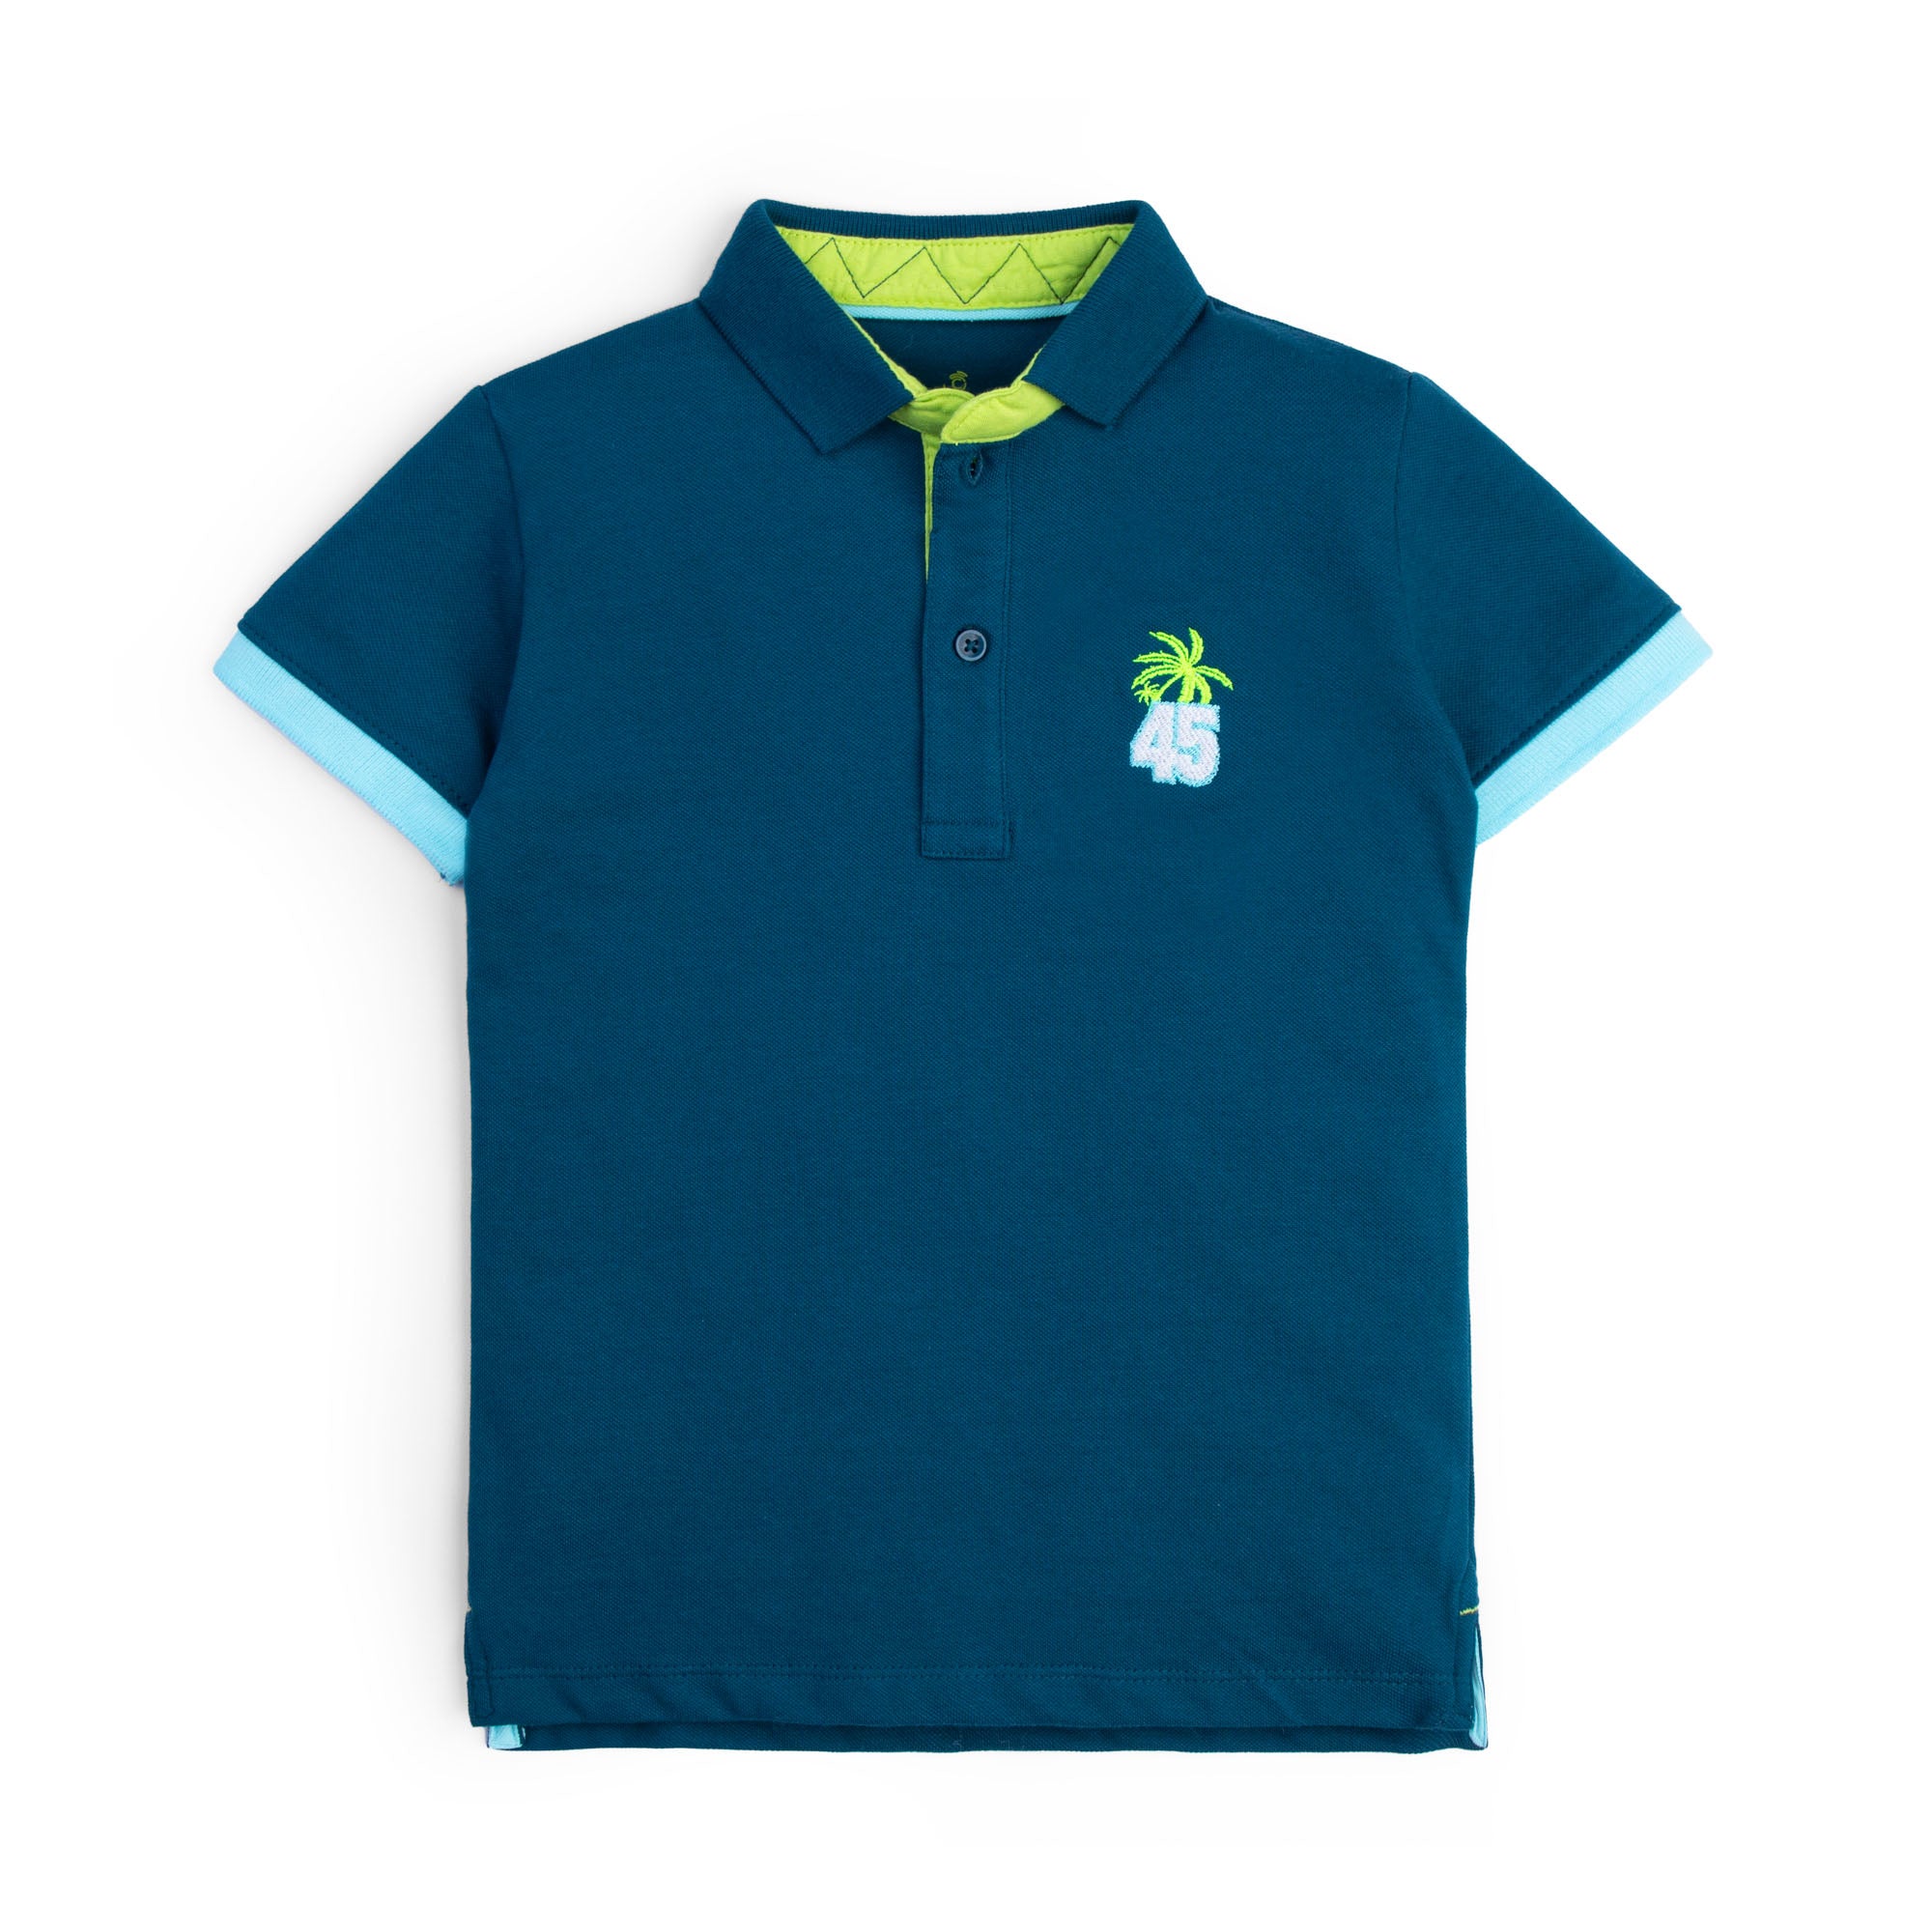 Solid Teal Polo